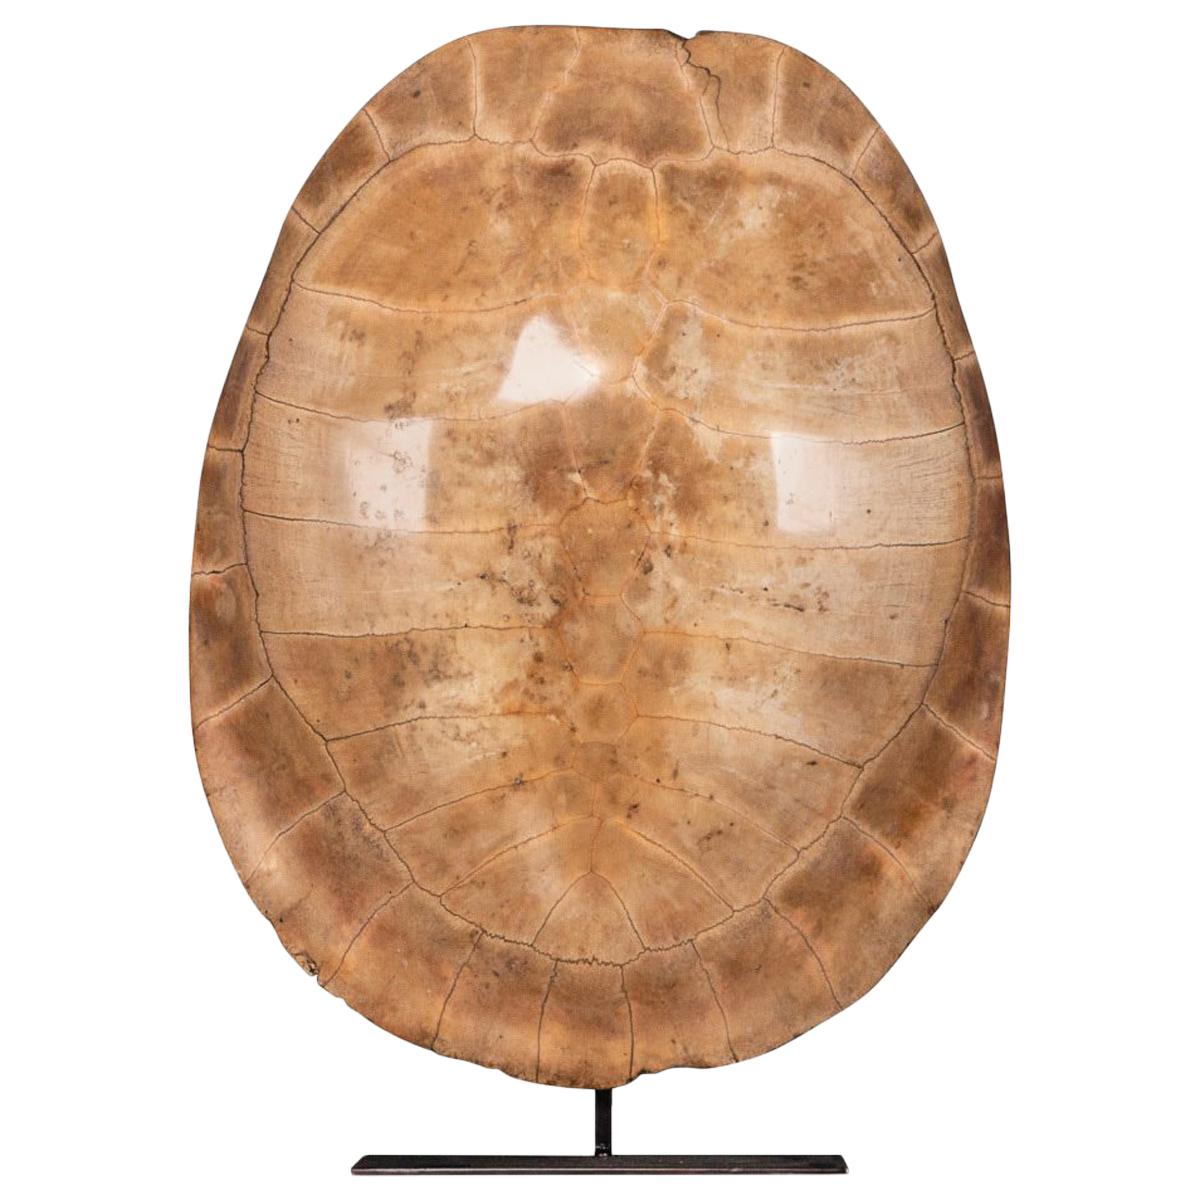 Late 19th Century "Blonde" Turtle Shell, on a Lamp Mounted Stand